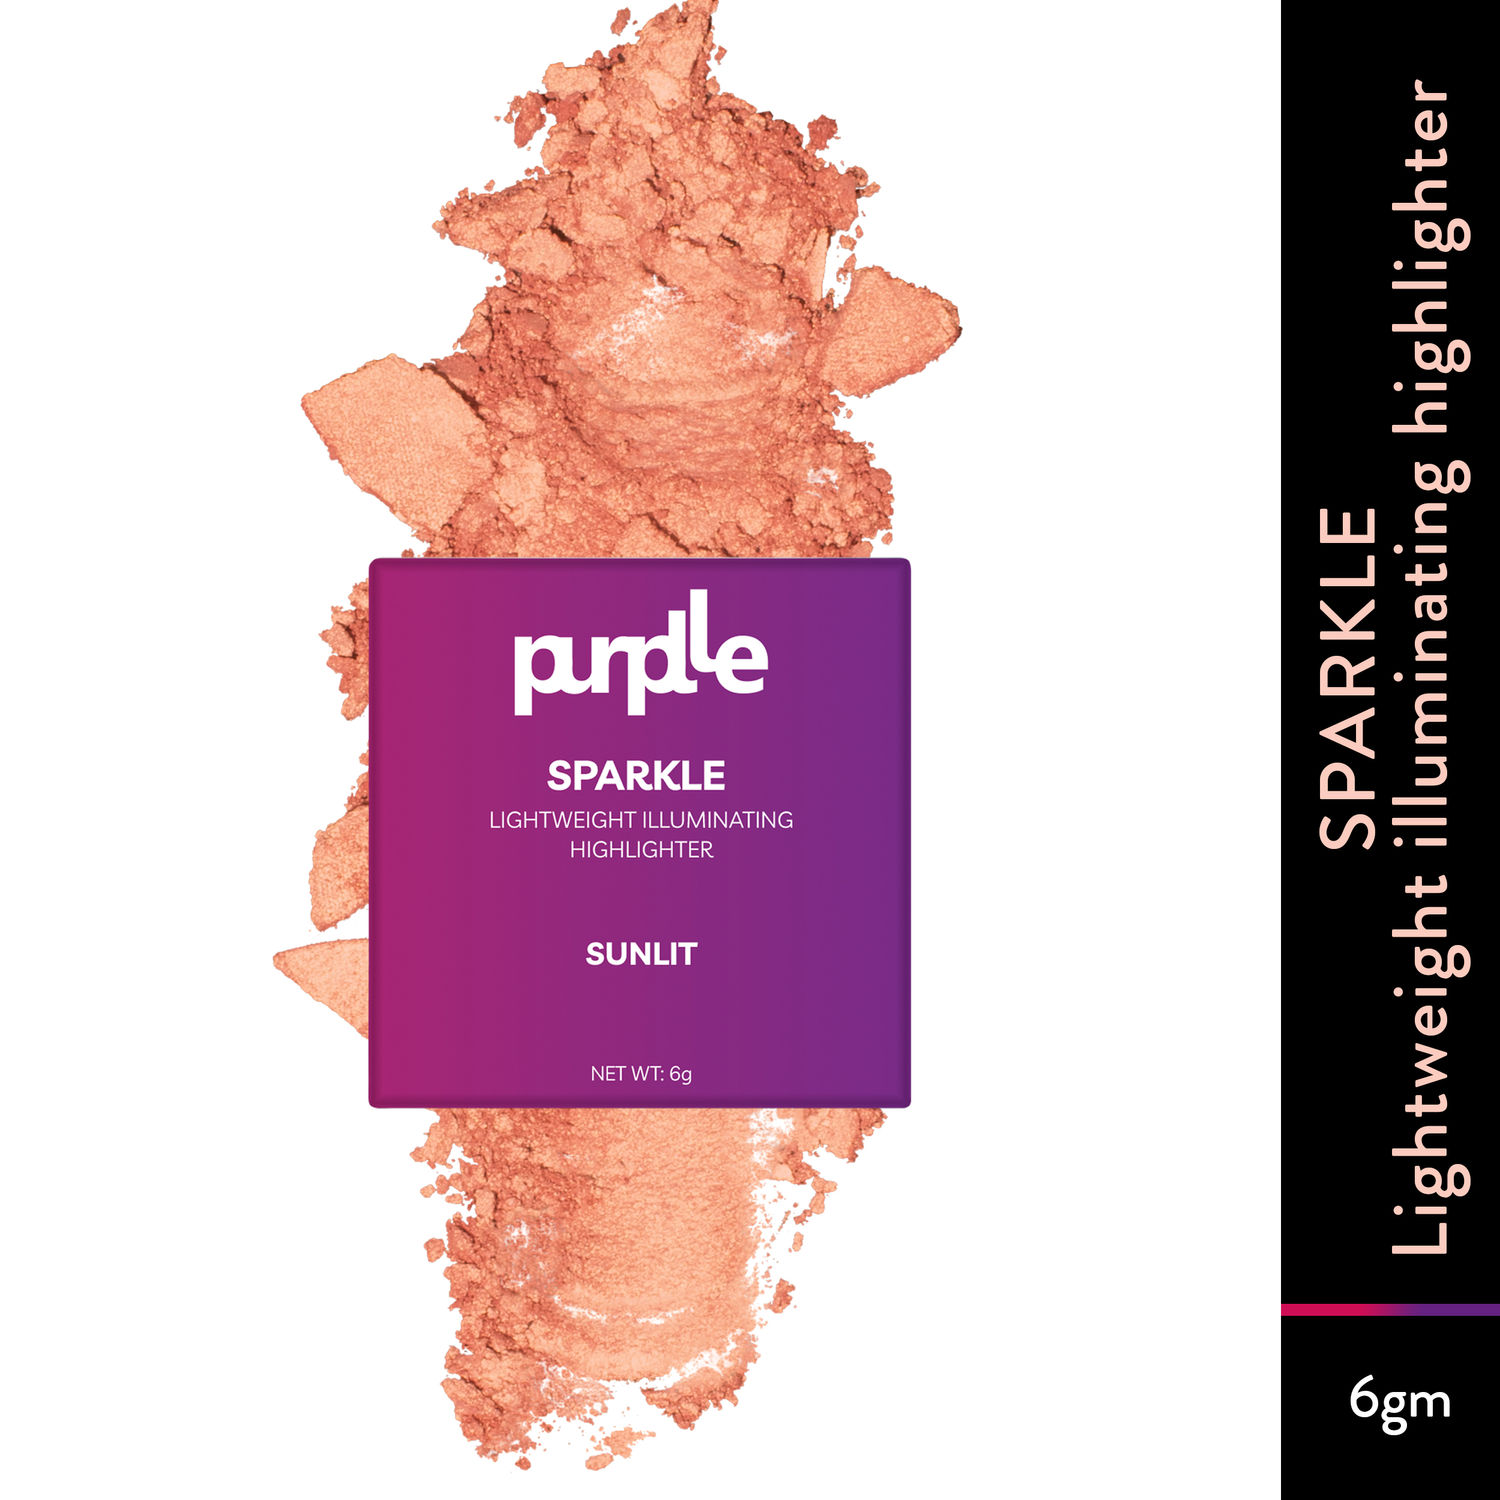 Buy Purplle Sparkle Lightweight Illuminating Highlighter - Sunlit | Ultra Shimmery| High Pigmentation | Lifts Face | Blendable | Long Lasting (6gm) - Purplle